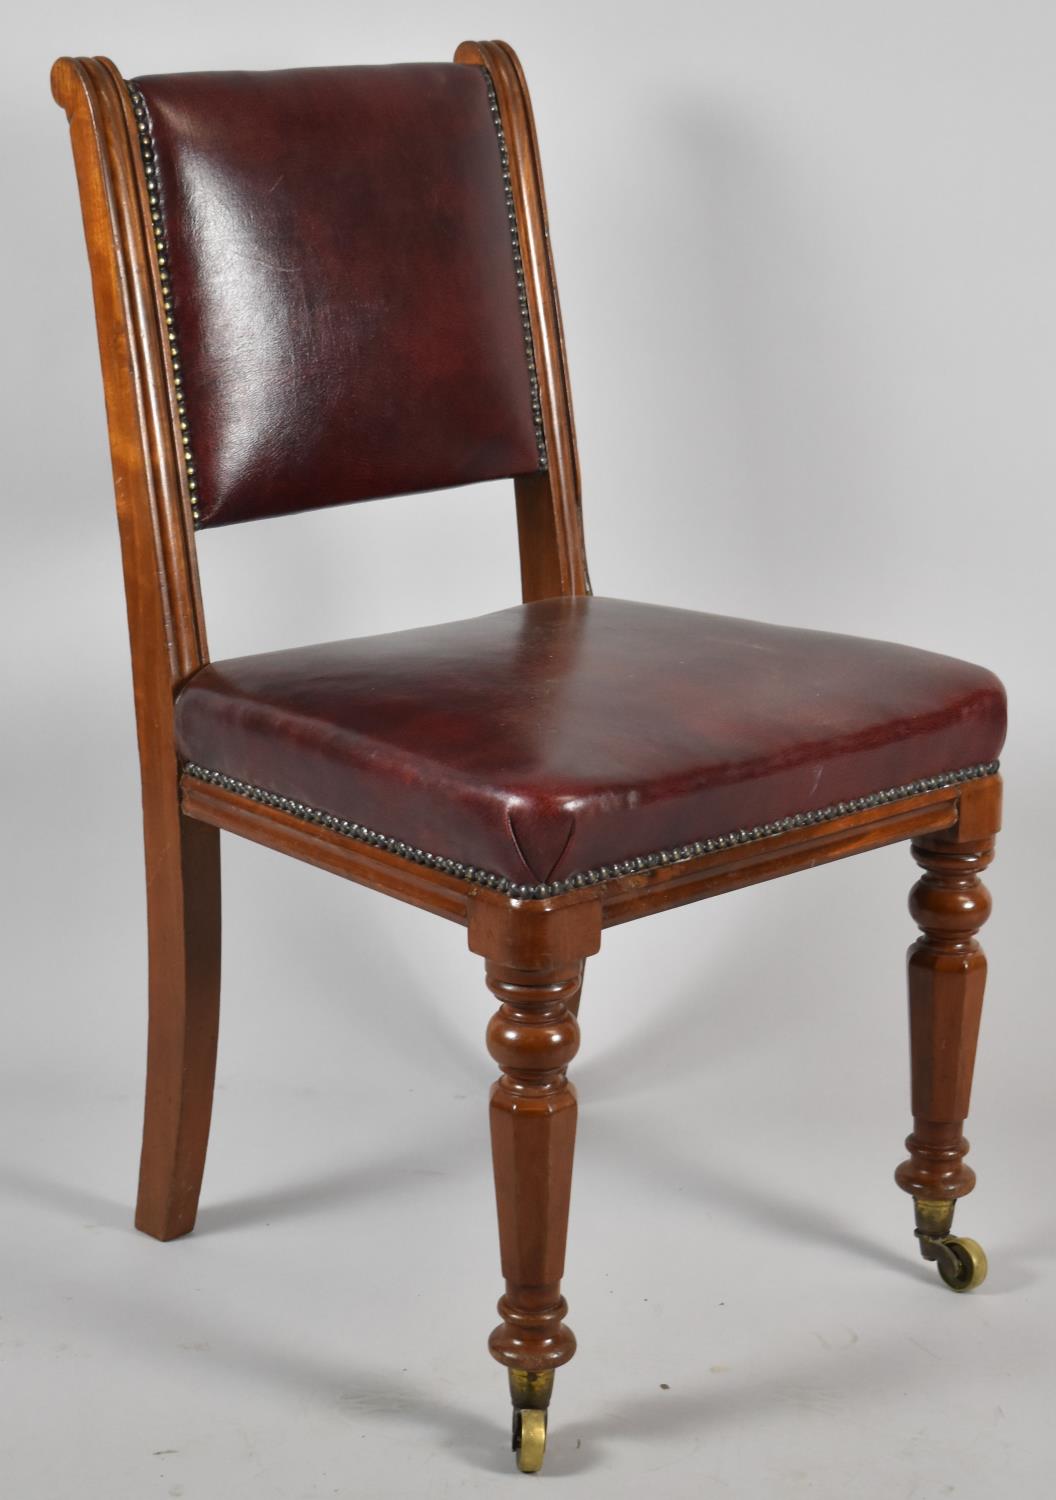 A Set of Four Hide Upholstered Mahogany Framed Edwardian Dining Chairs - Image 2 of 2